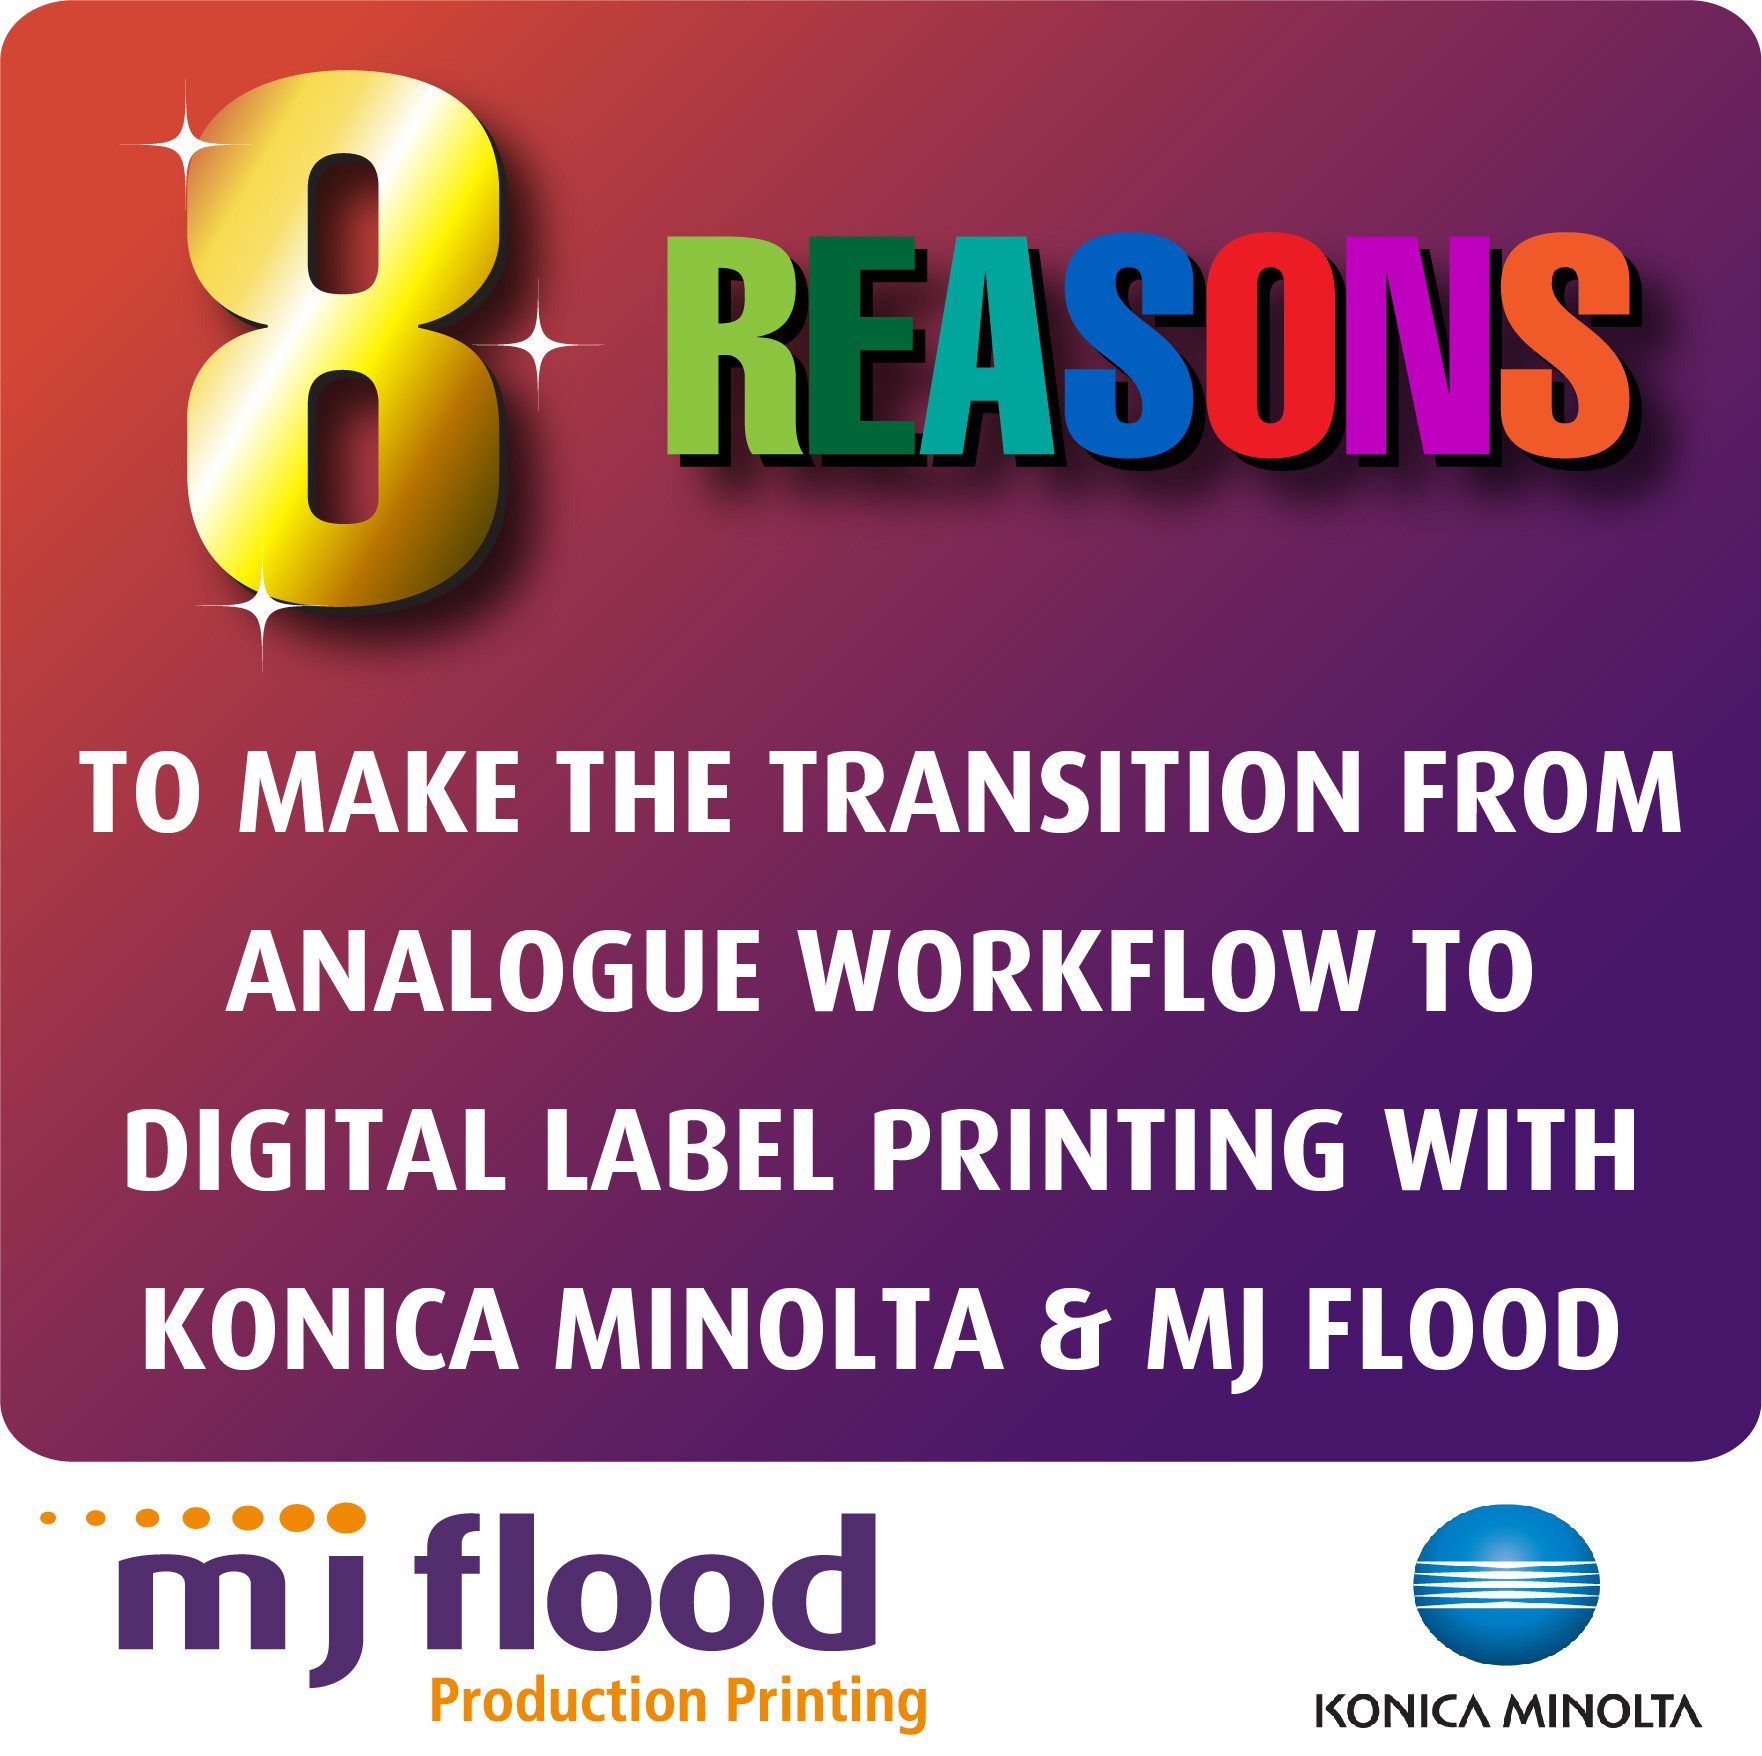 MAKE THE TRANSITION FROM ANALOGUE WORKFLOW TO DIGITAL LABEL PRINTING